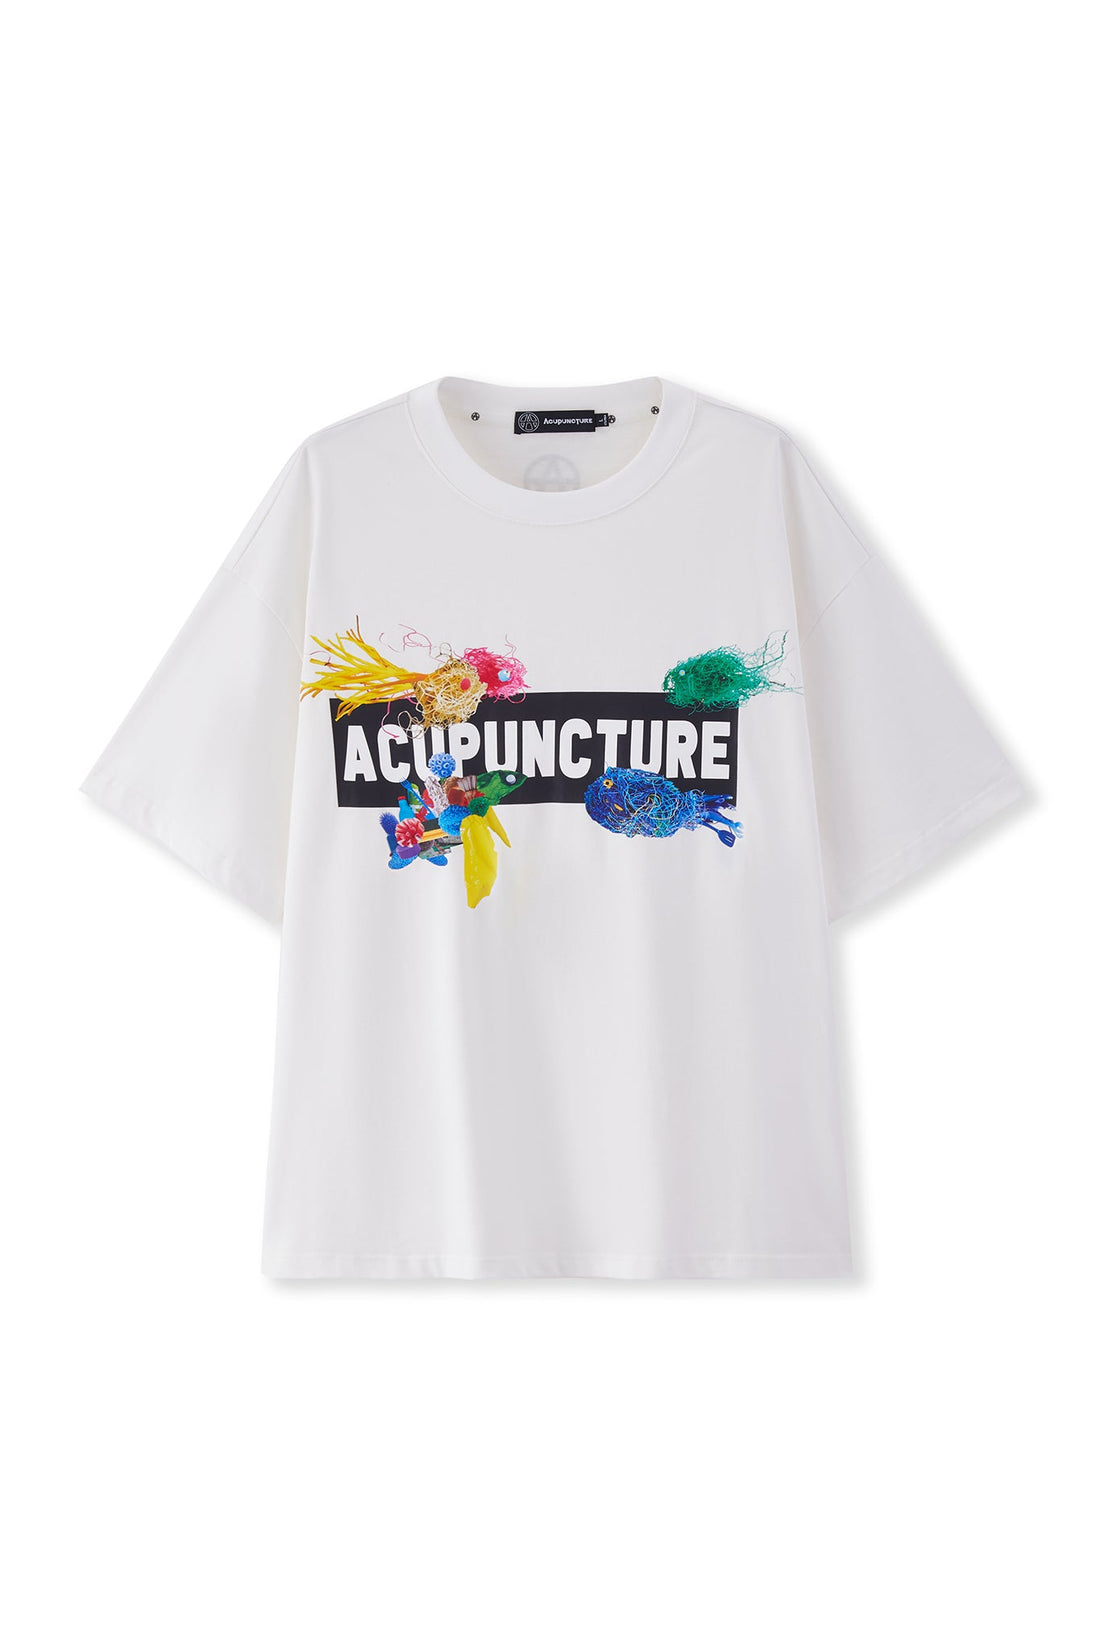 THE POLLUTED TSHIRT WHITE Acupuncture